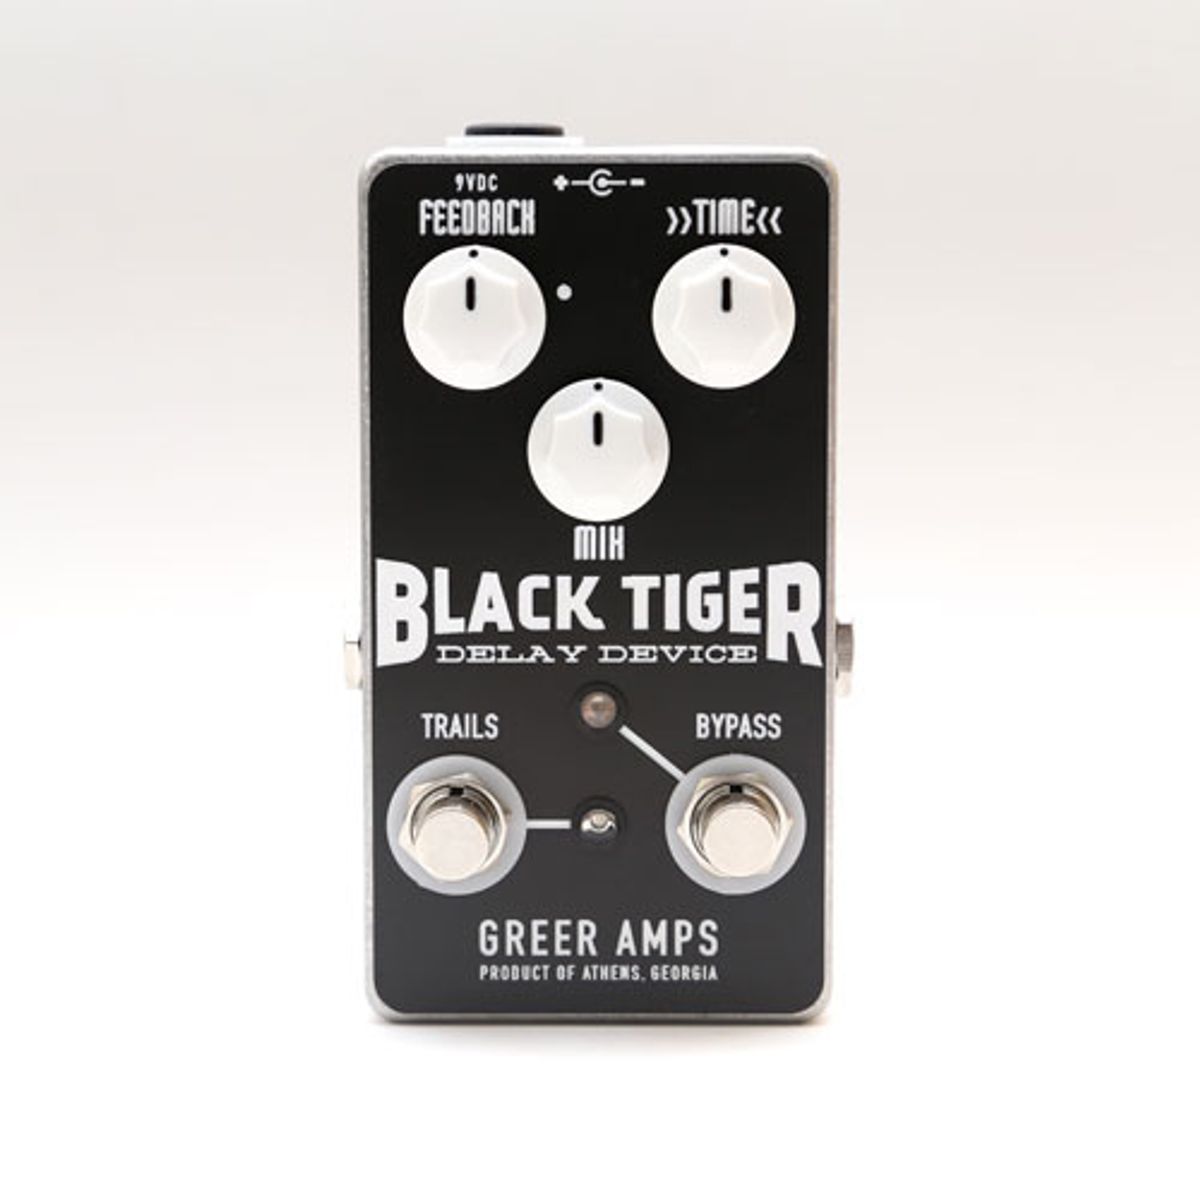 Greer Amps Introduces the Black Tiger Delay and Hammer Distortion